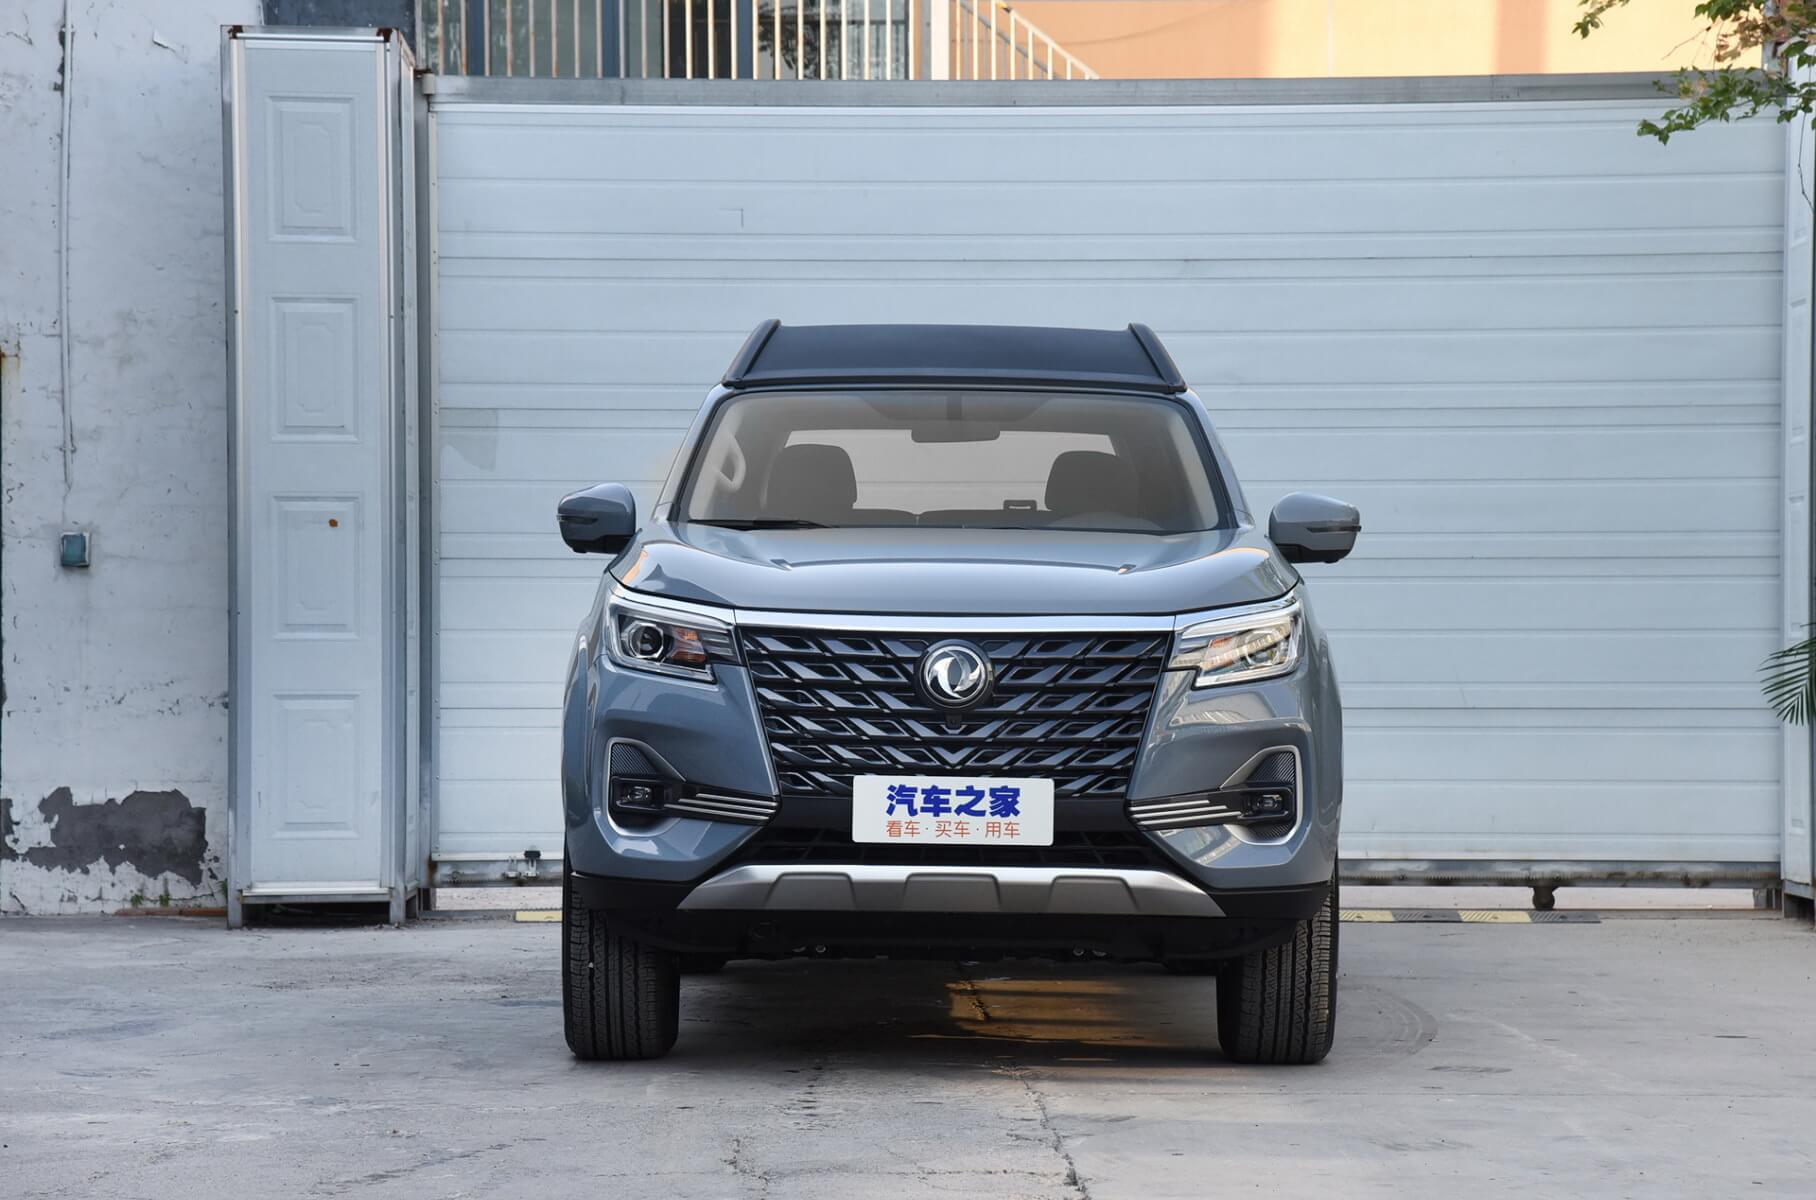 A new all-wheel drive frame “Chinese” has arrived in Russia